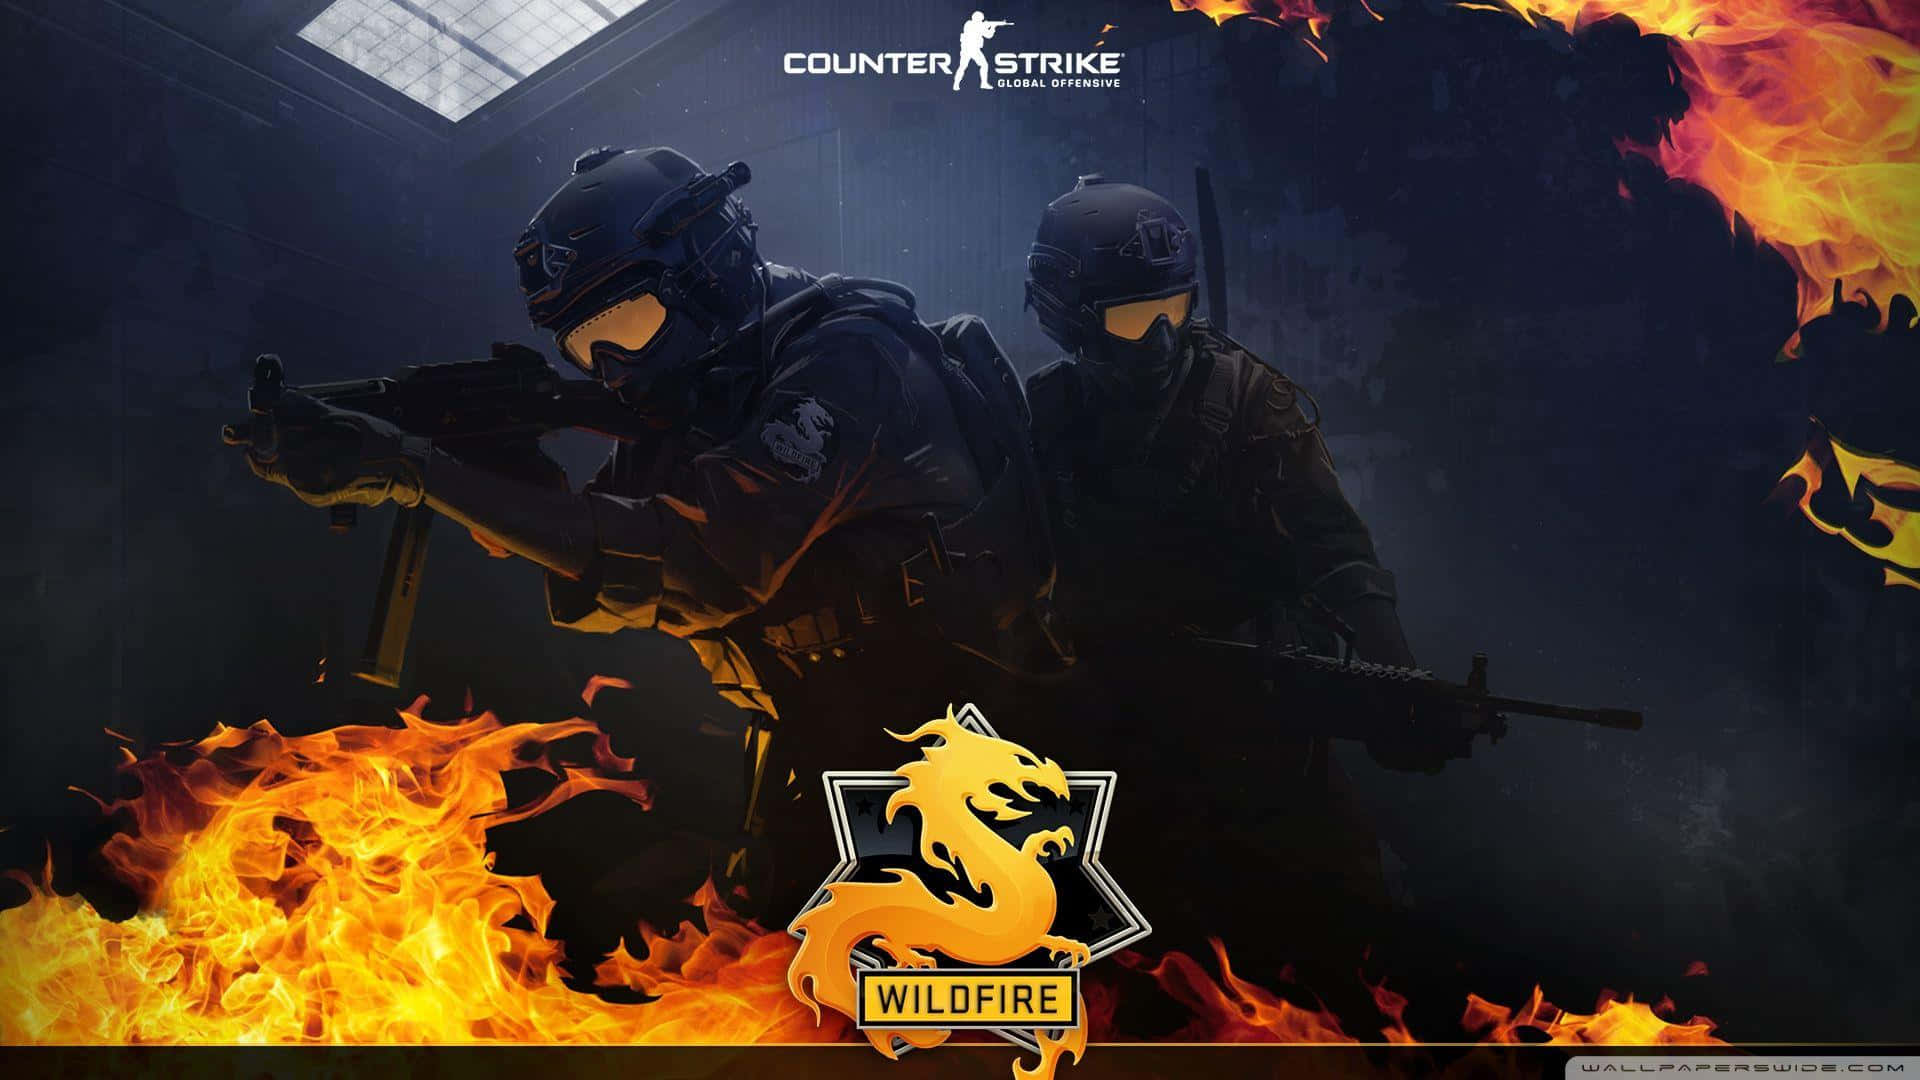 Ready Your Sniper Rifle And Join The Fight In Counterstrike Wallpaper